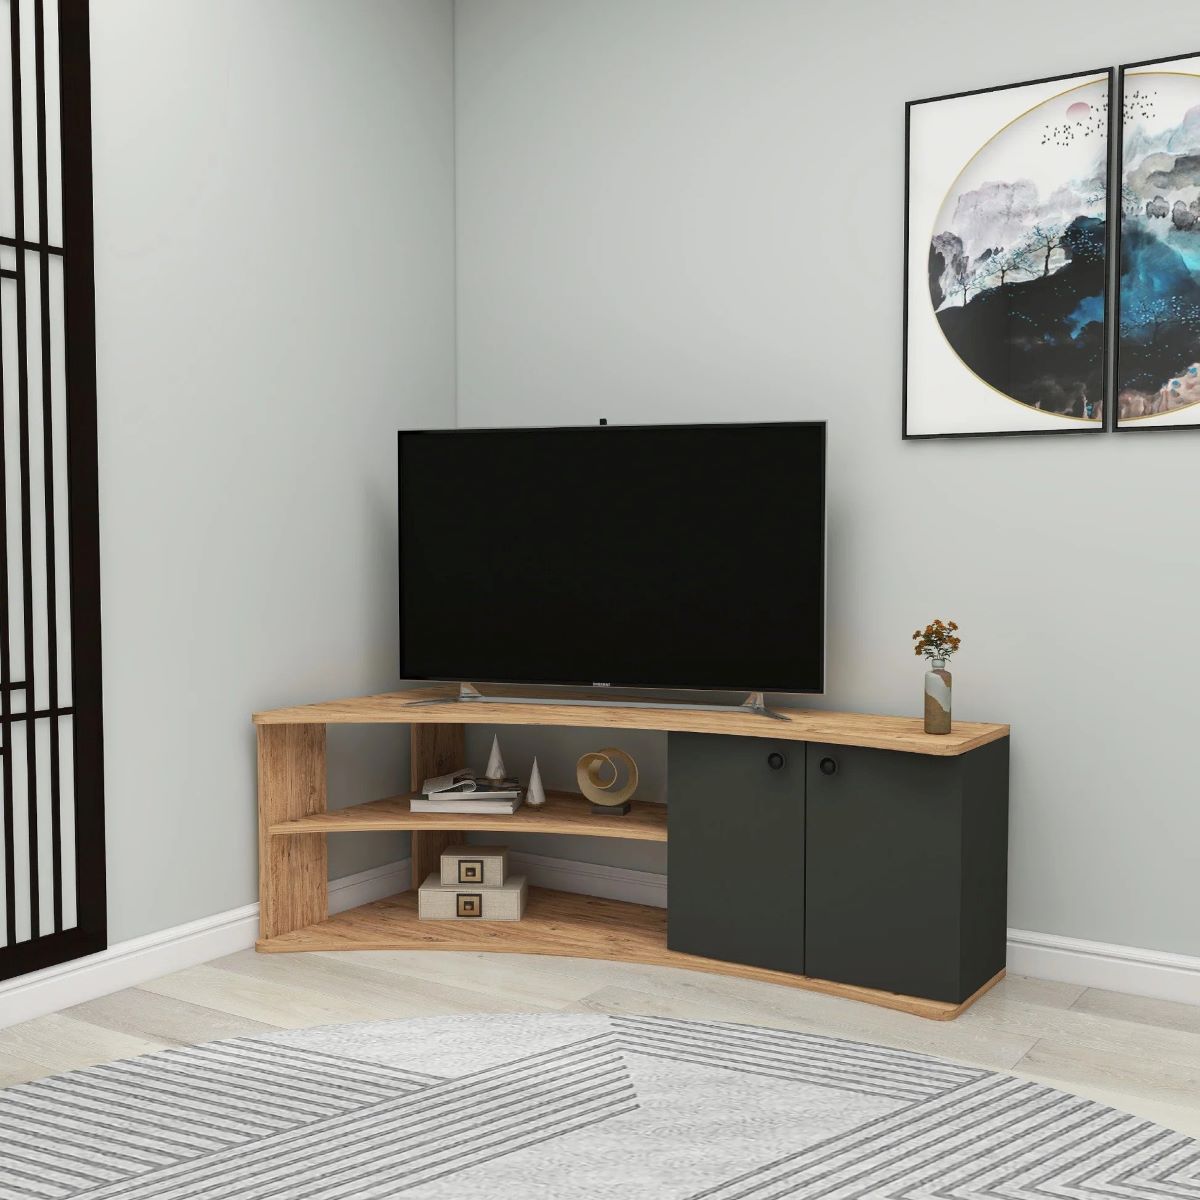 How To Build A Corner TV Stand